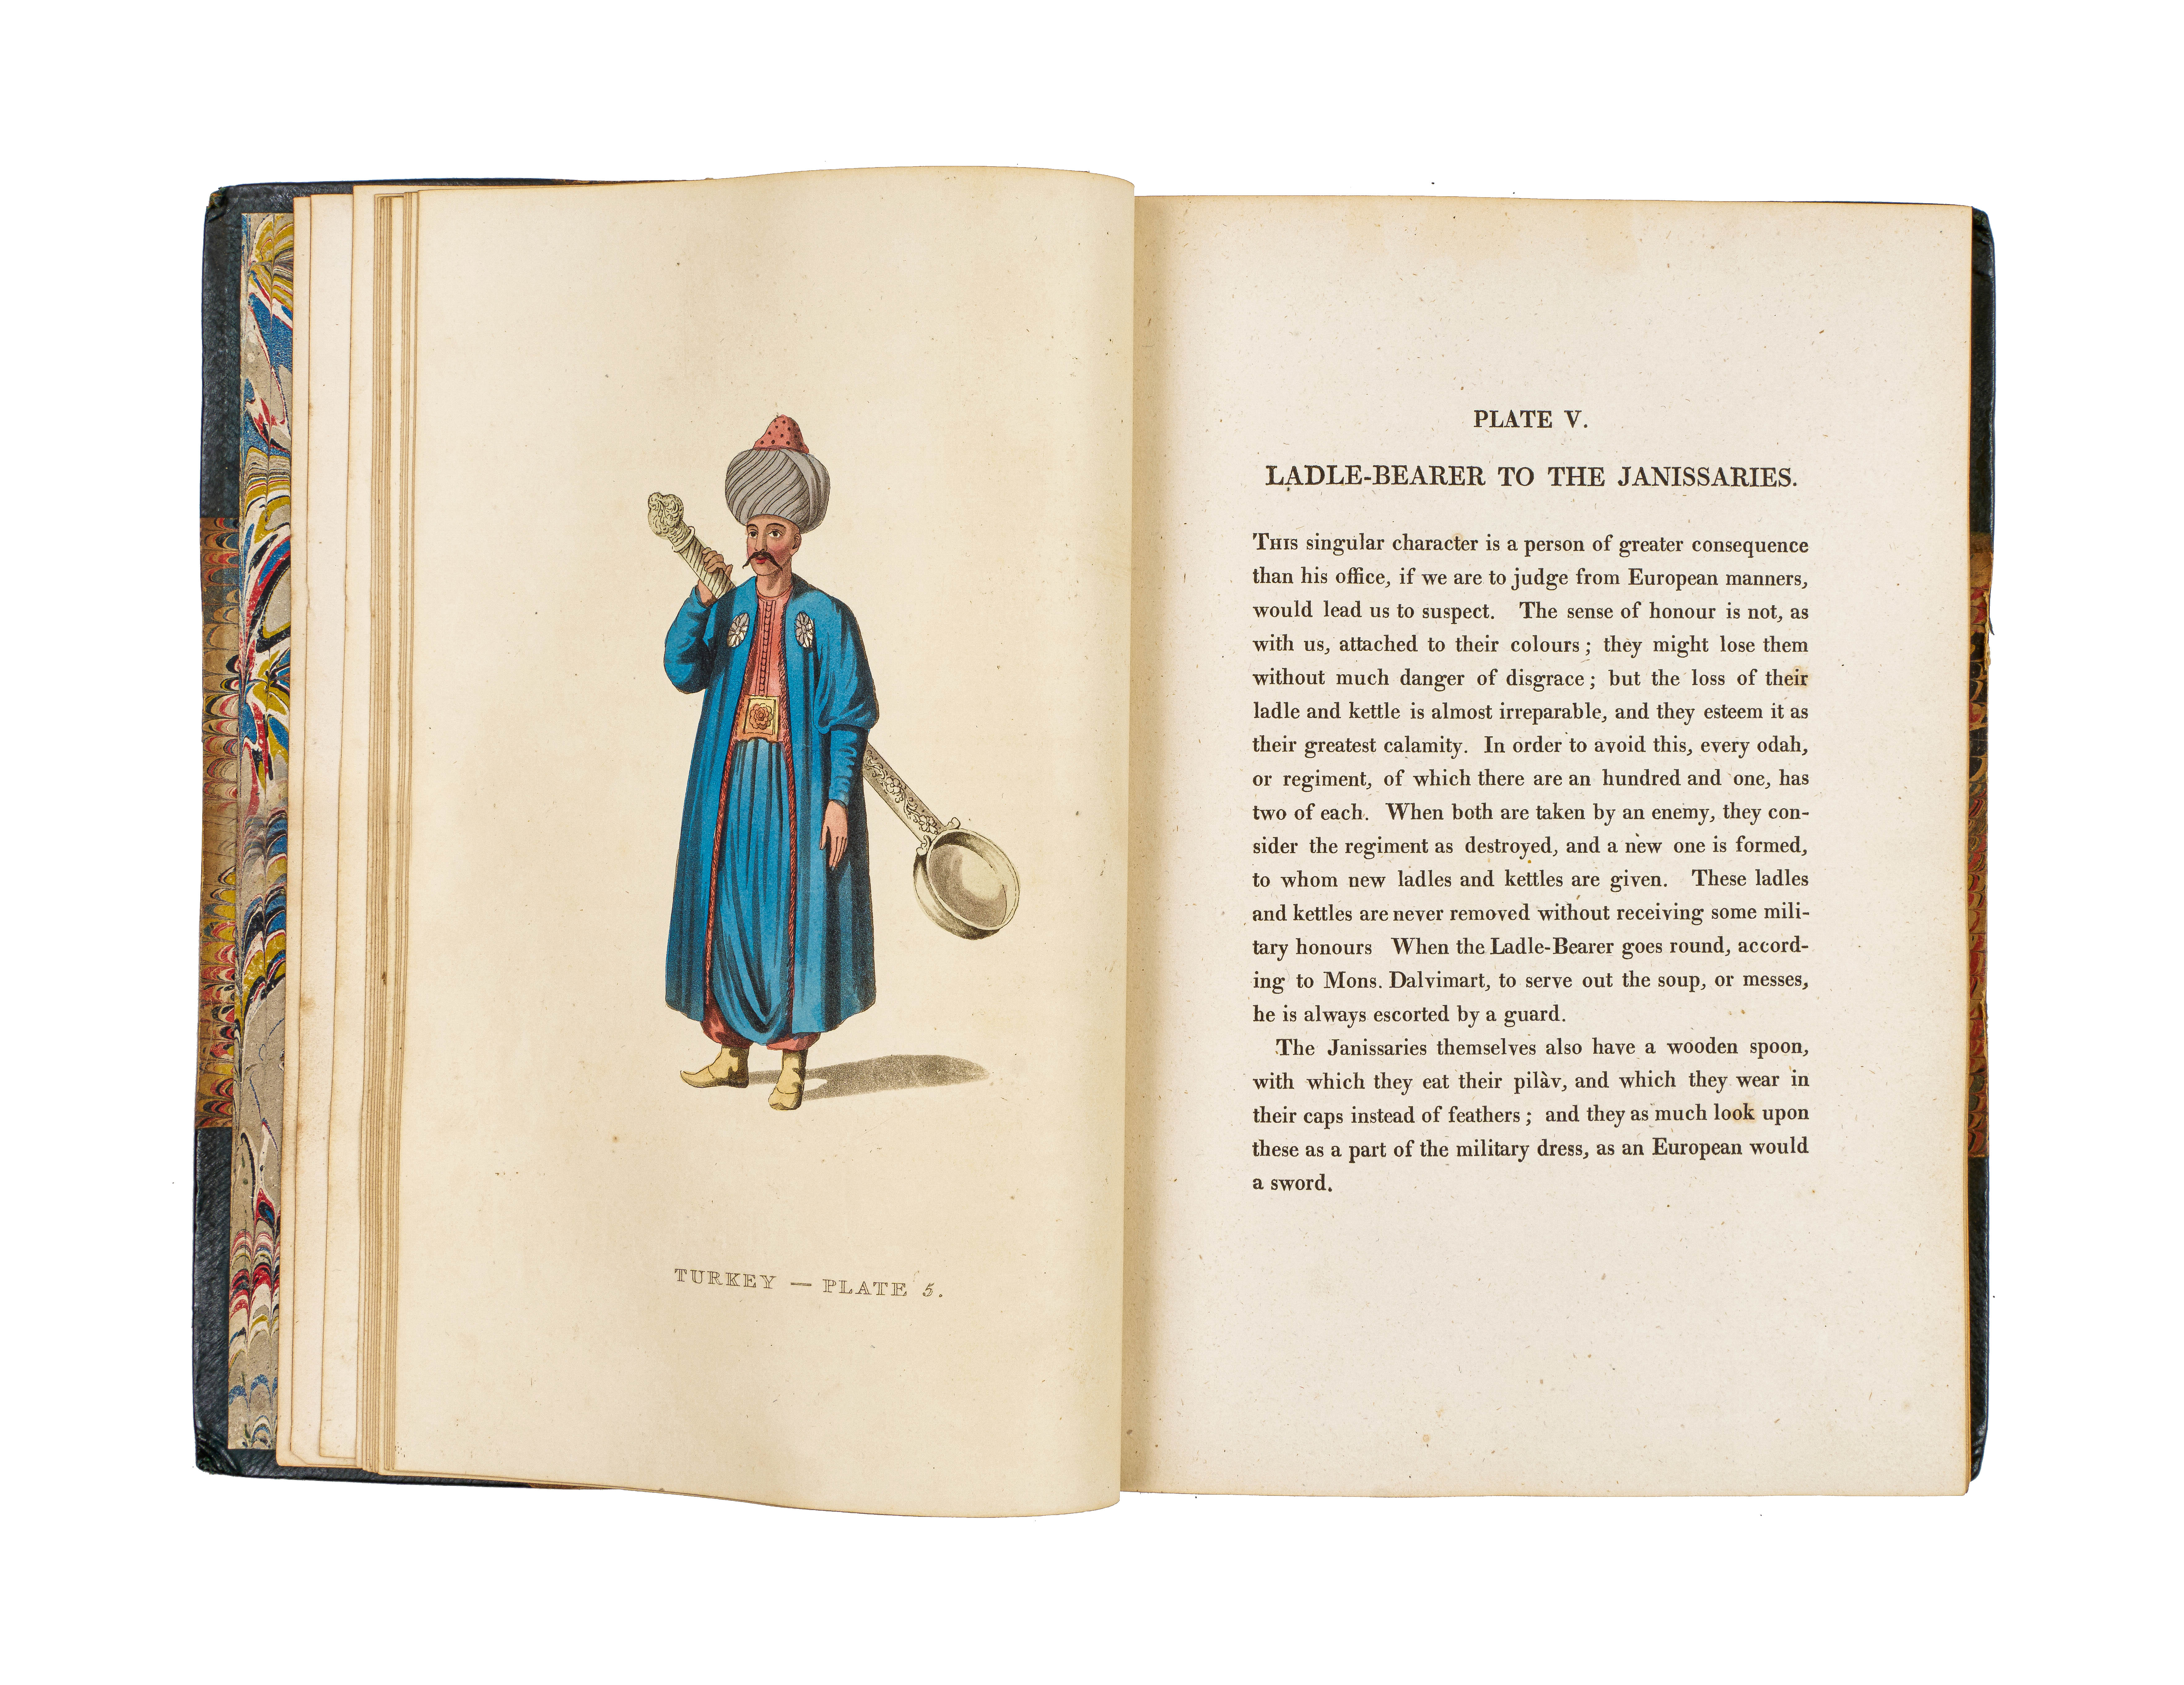 COSTUMES TURKEY, PICTURESQUE REPRESENTATIONS OF THE DRESS AND MANNERS OF THE TURKS, JOHN MURRAY, LON - Image 4 of 8